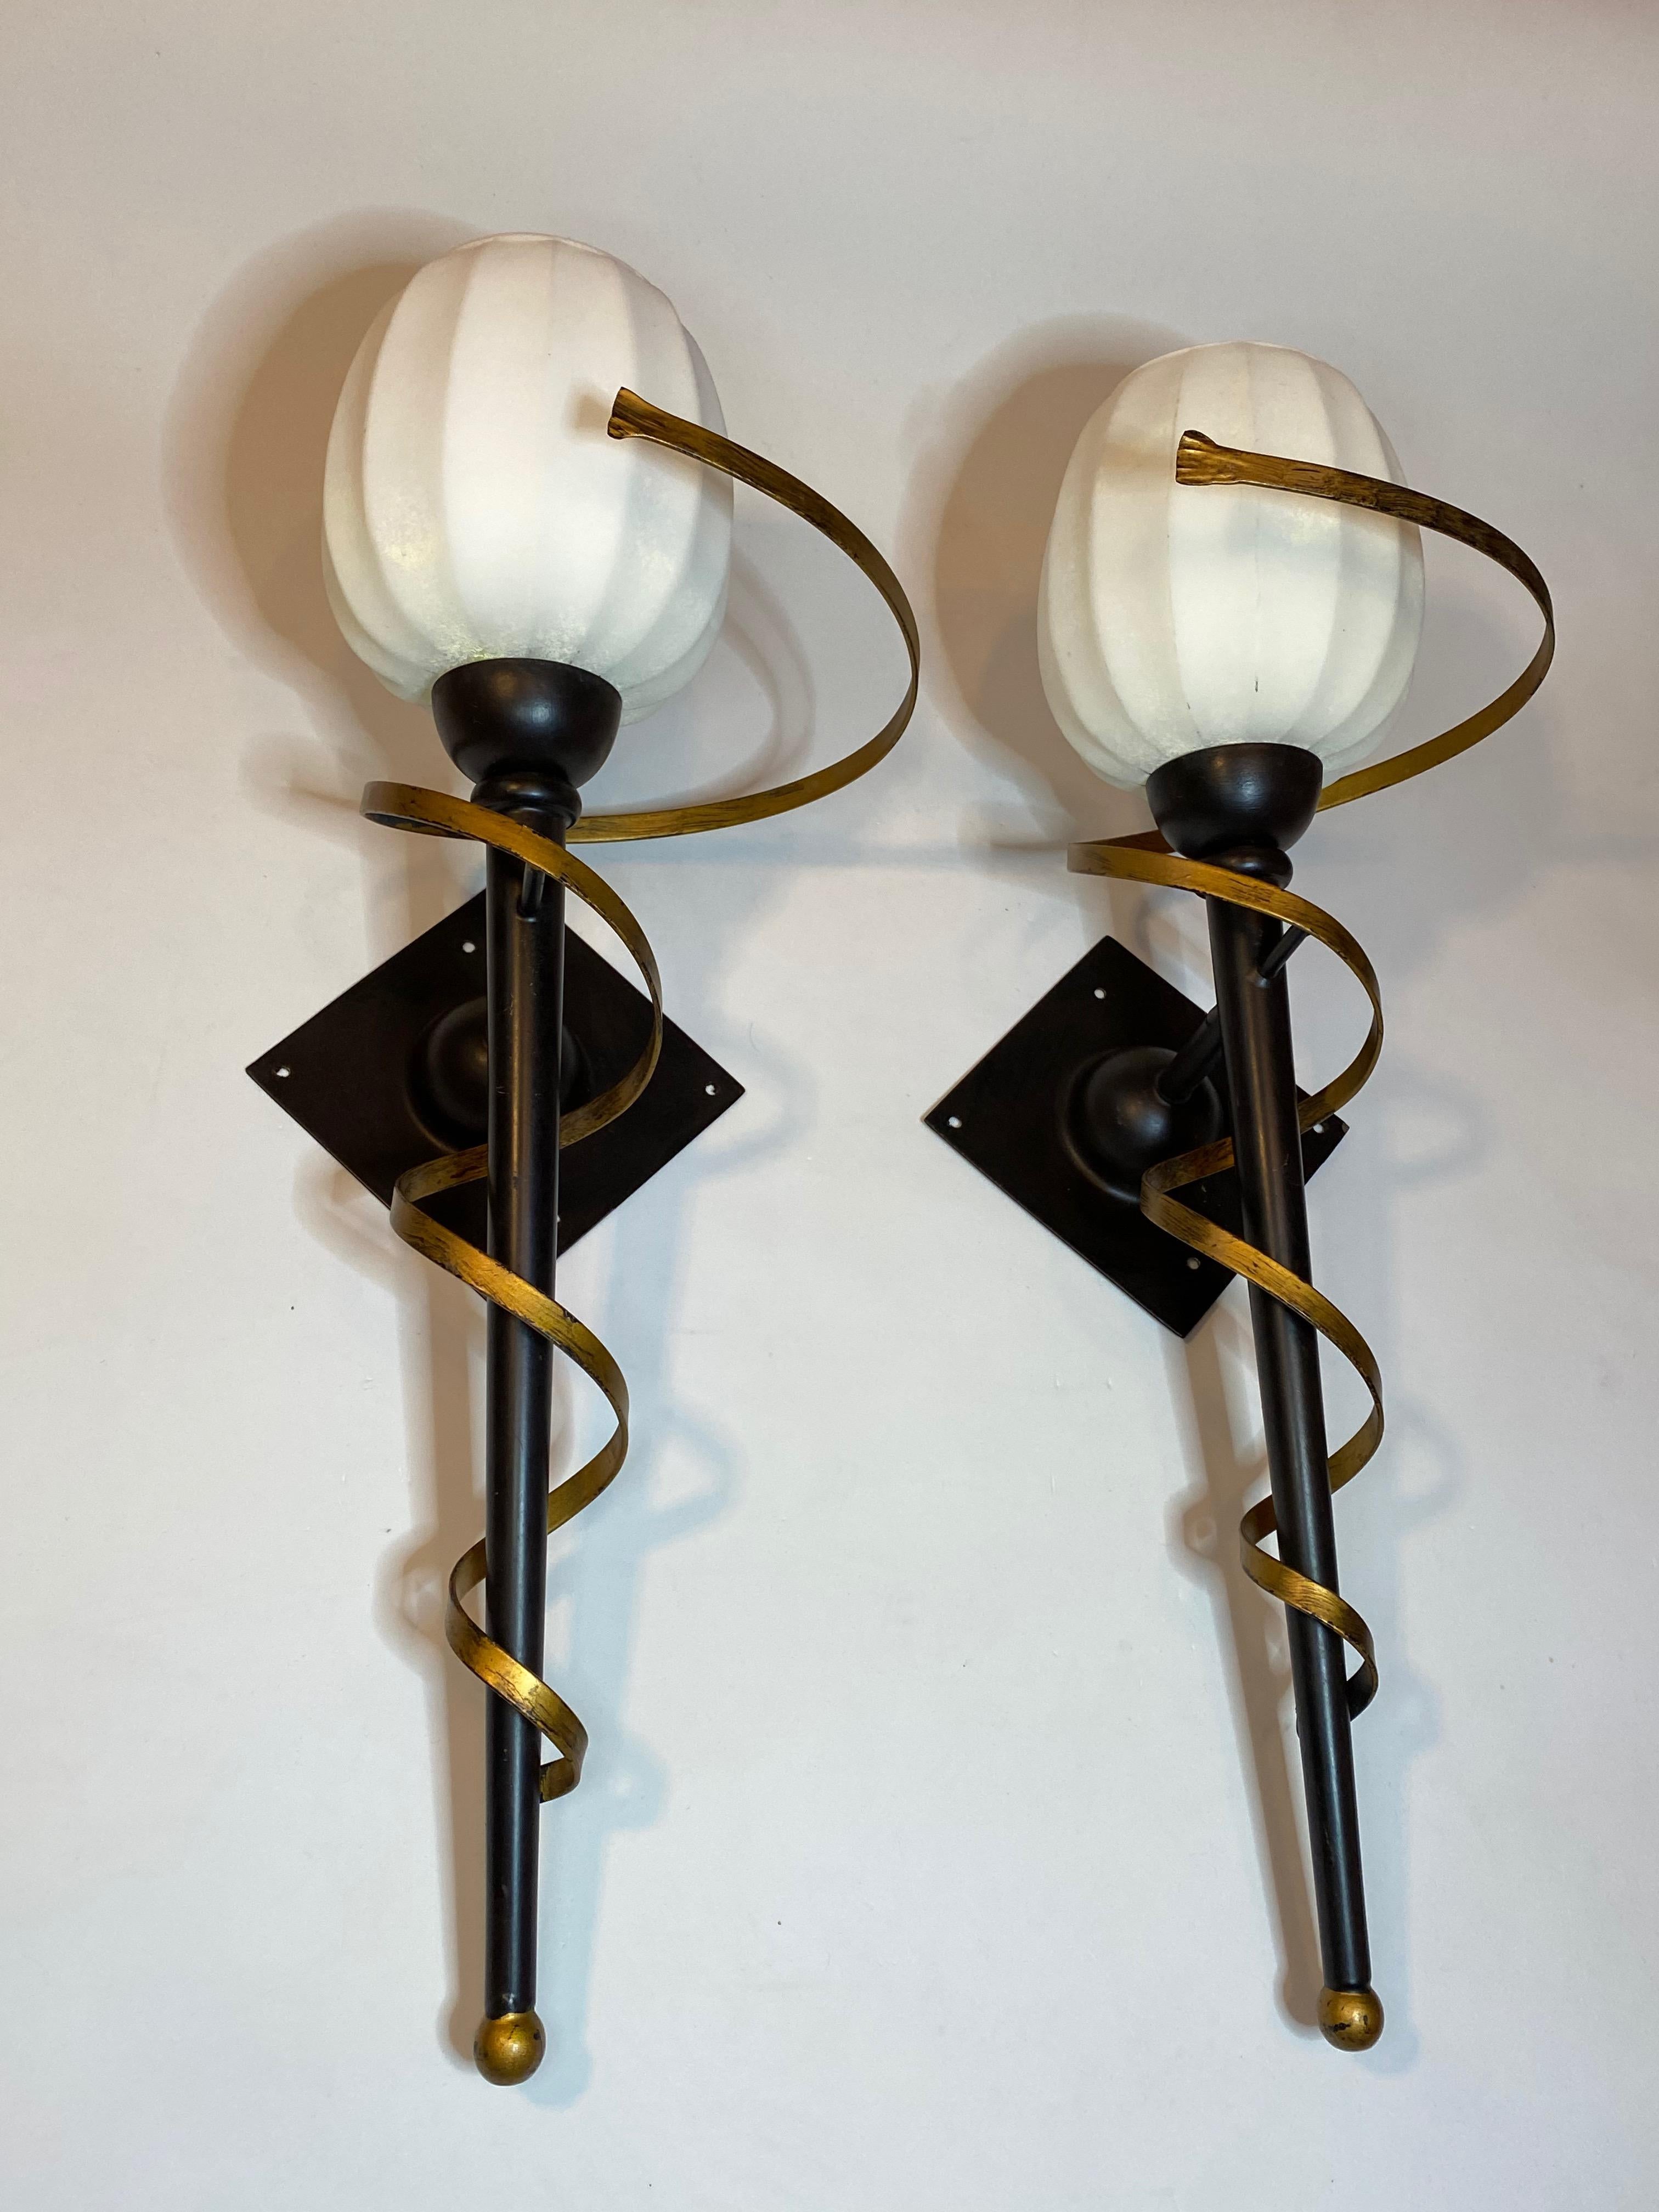 Pair of Torch Tole Sconces Gilded and Black Metal, Koegl Leuchten, 1980s For Sale 2